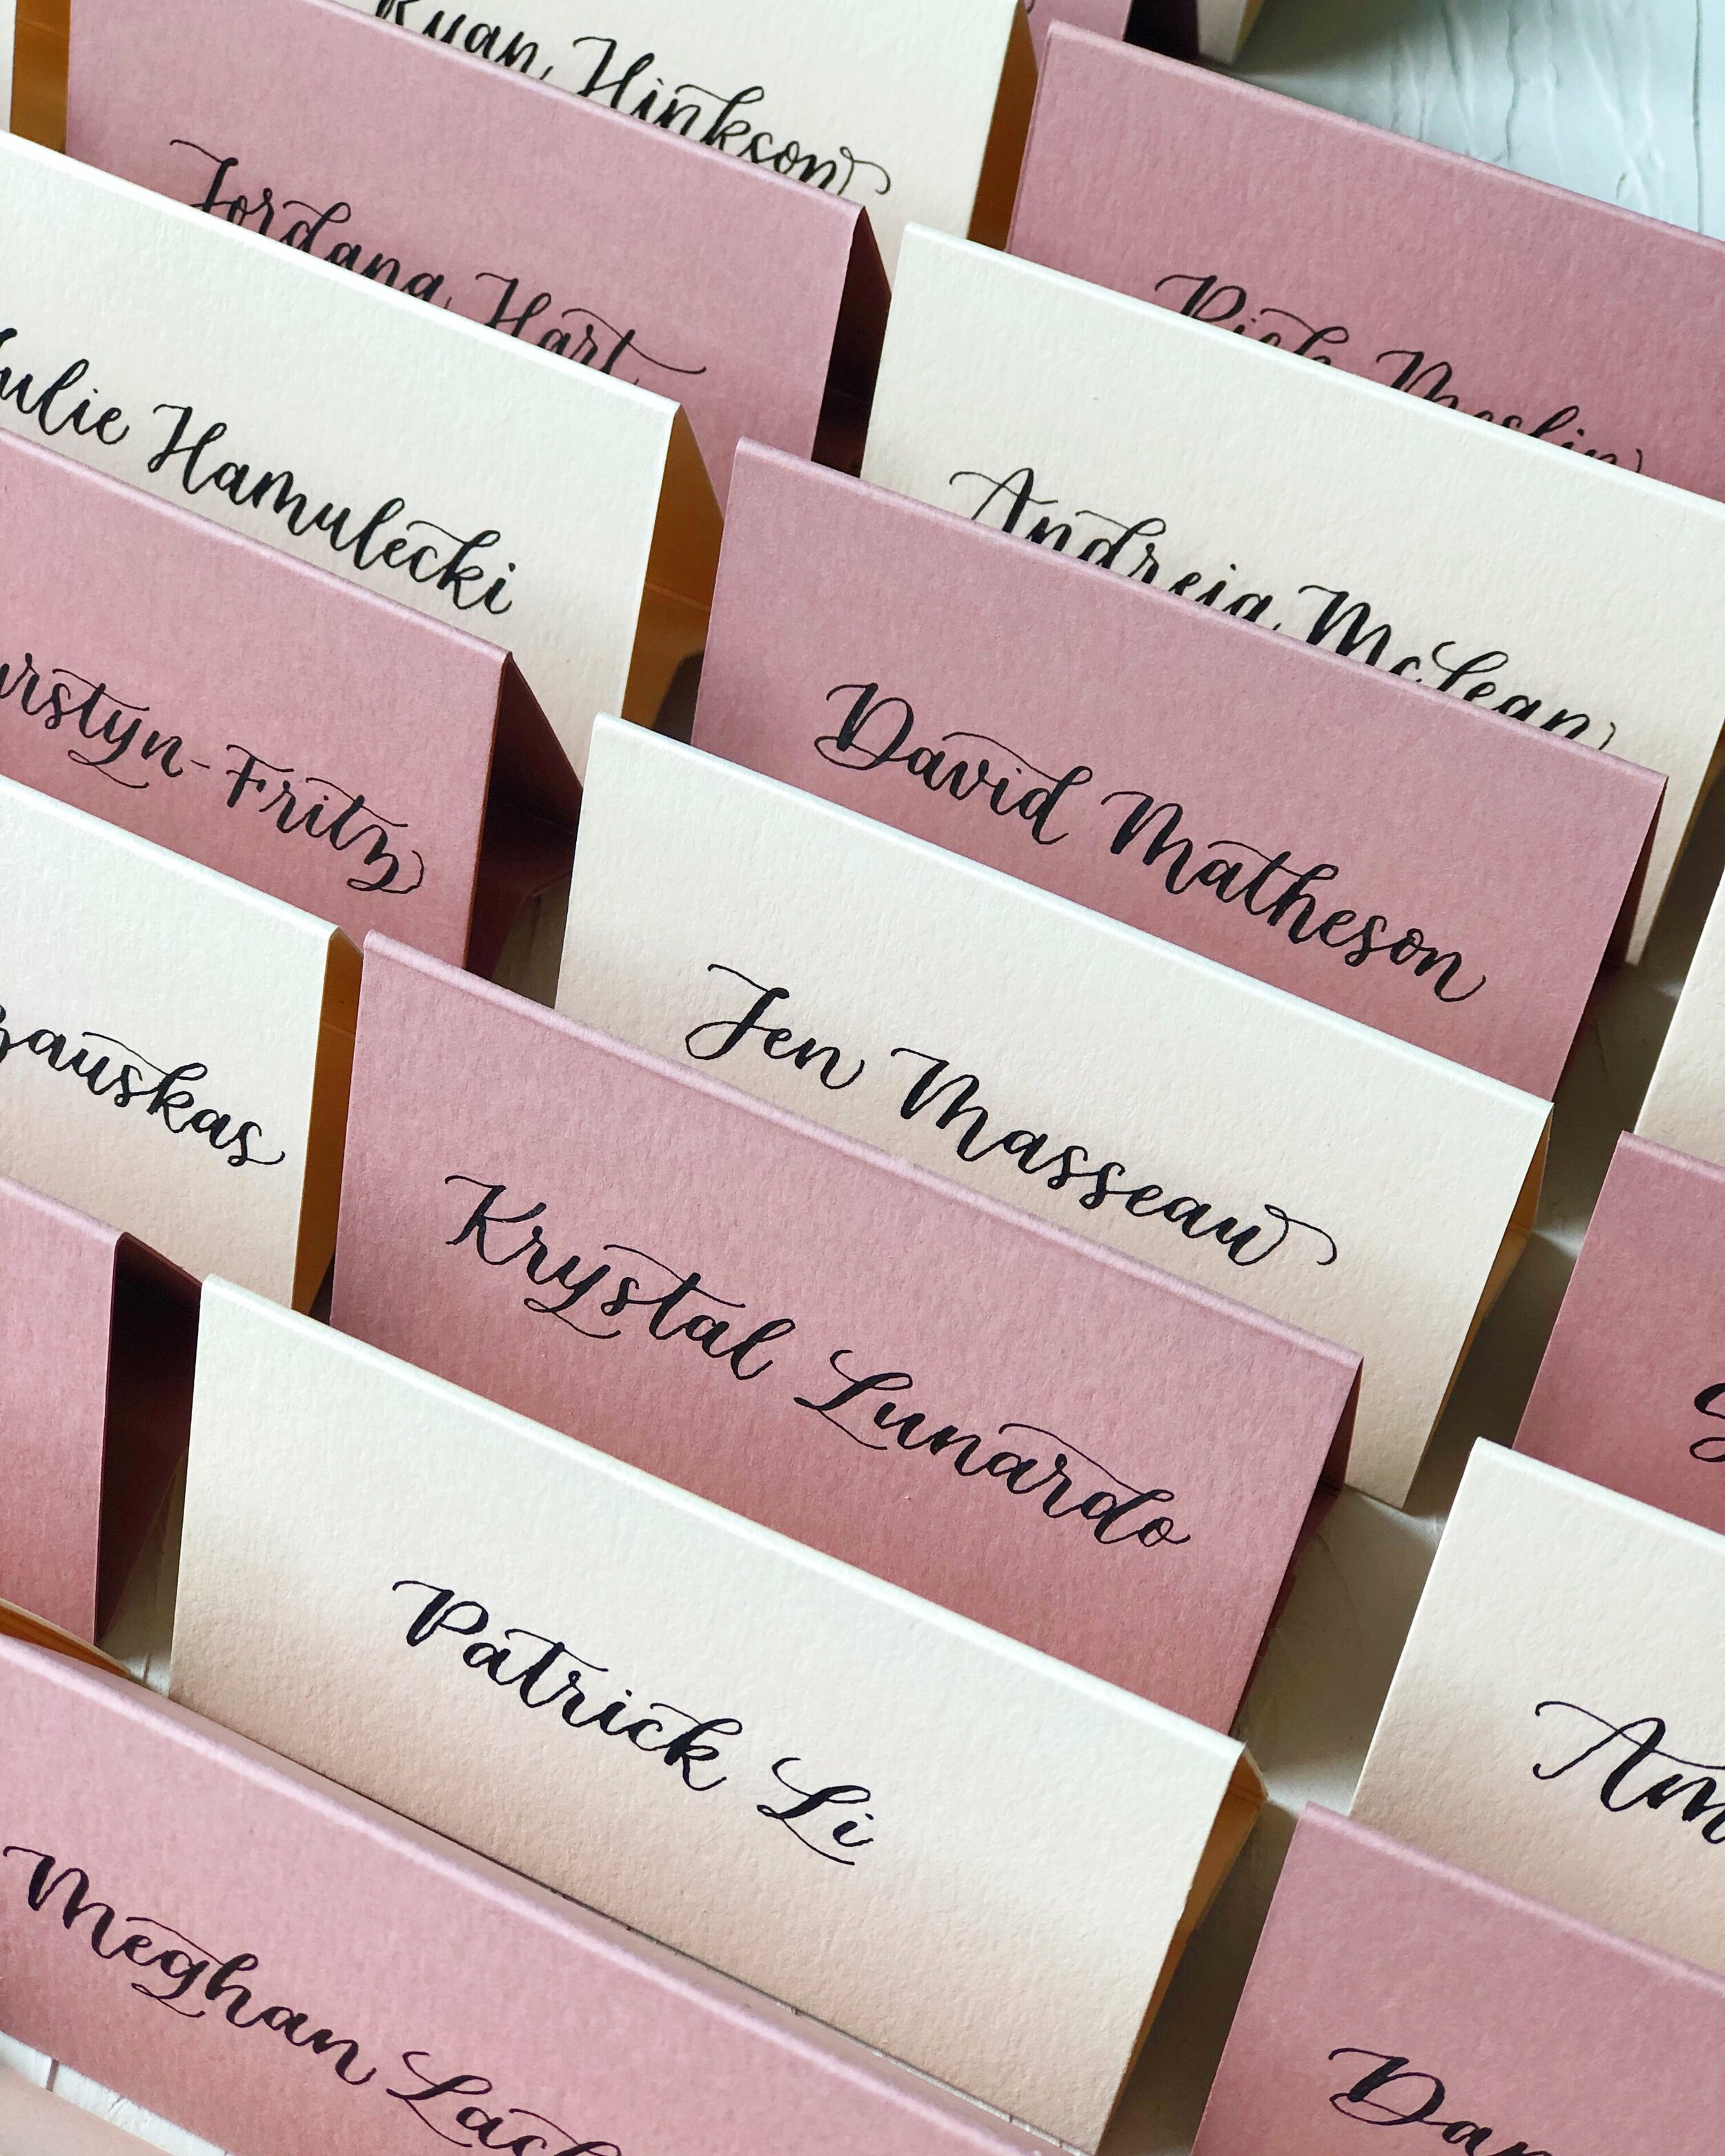 Calligraphy on place cards for the launch of Olli Brands in Toronto 